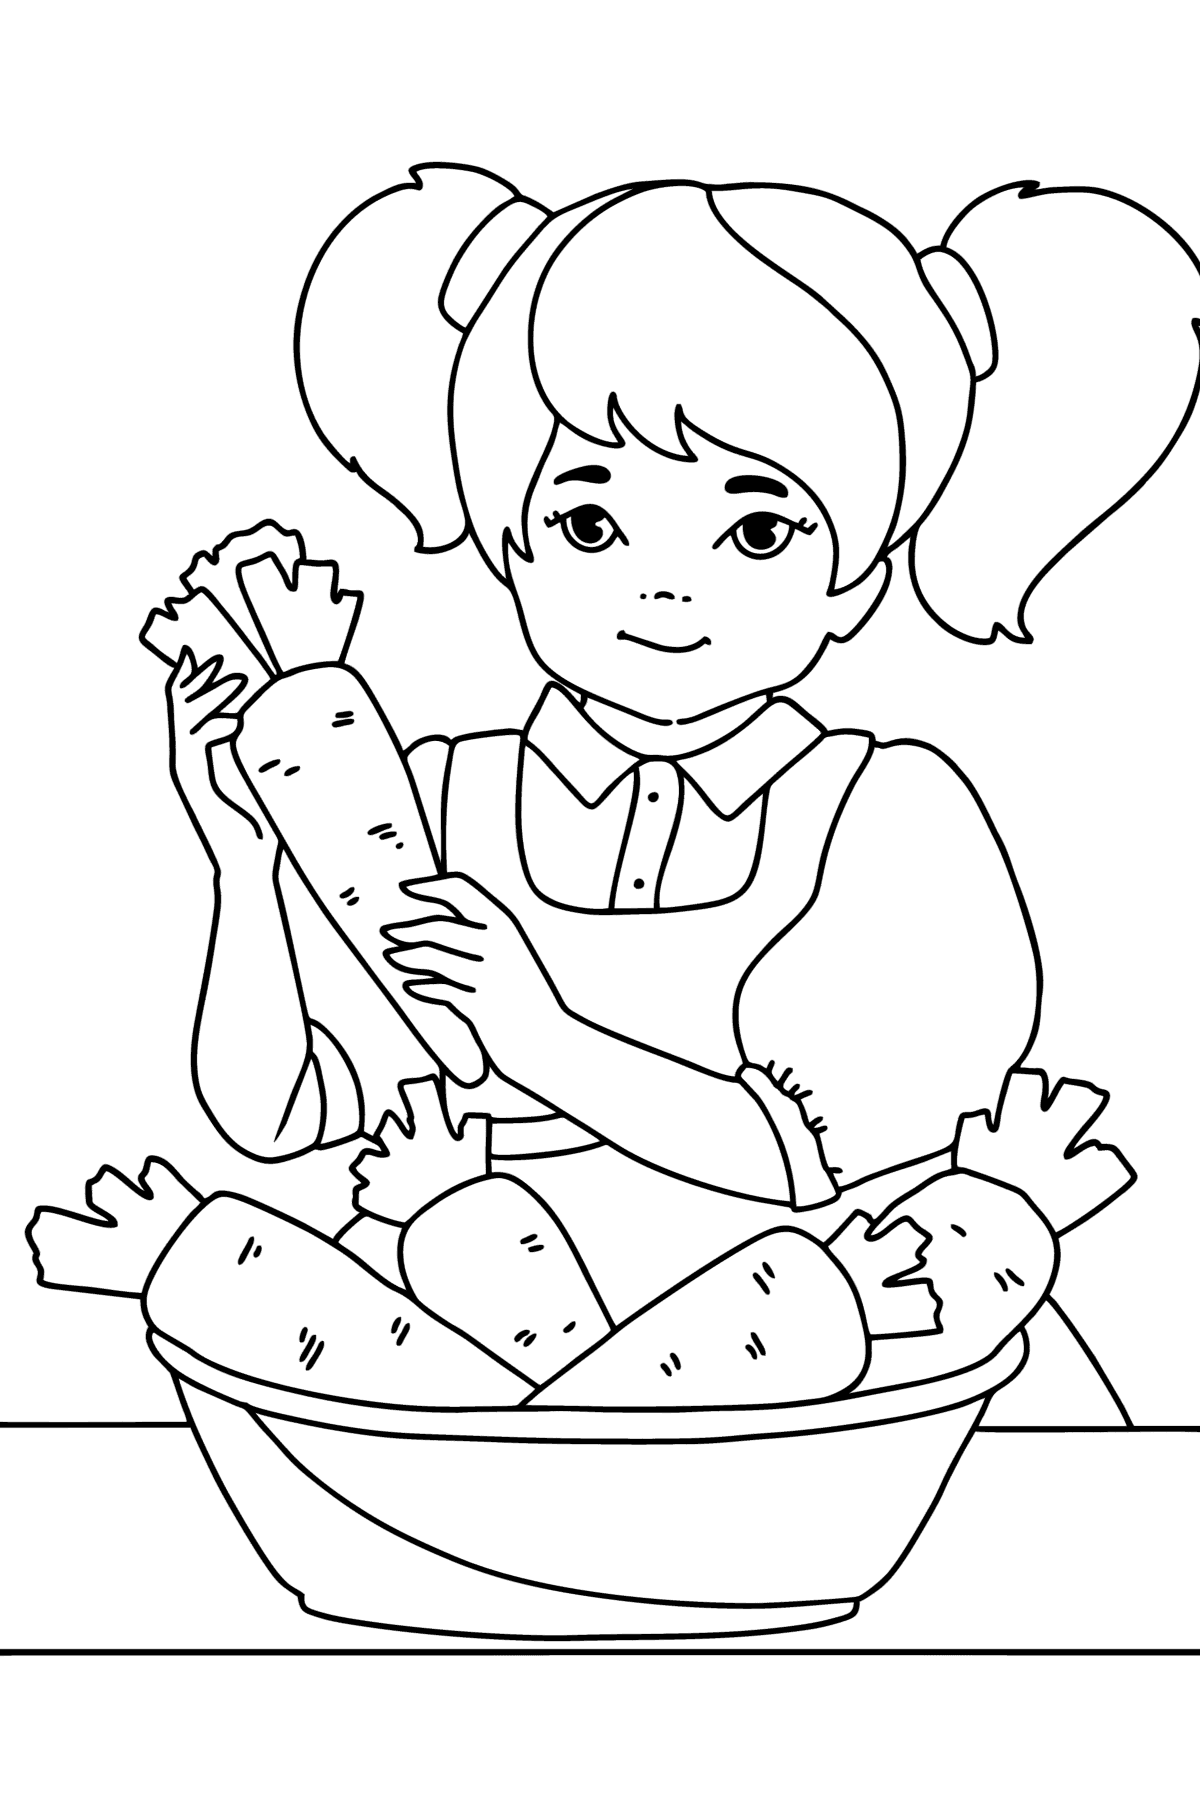 Girl in the kitchen сoloring page - Coloring Pages for Kids